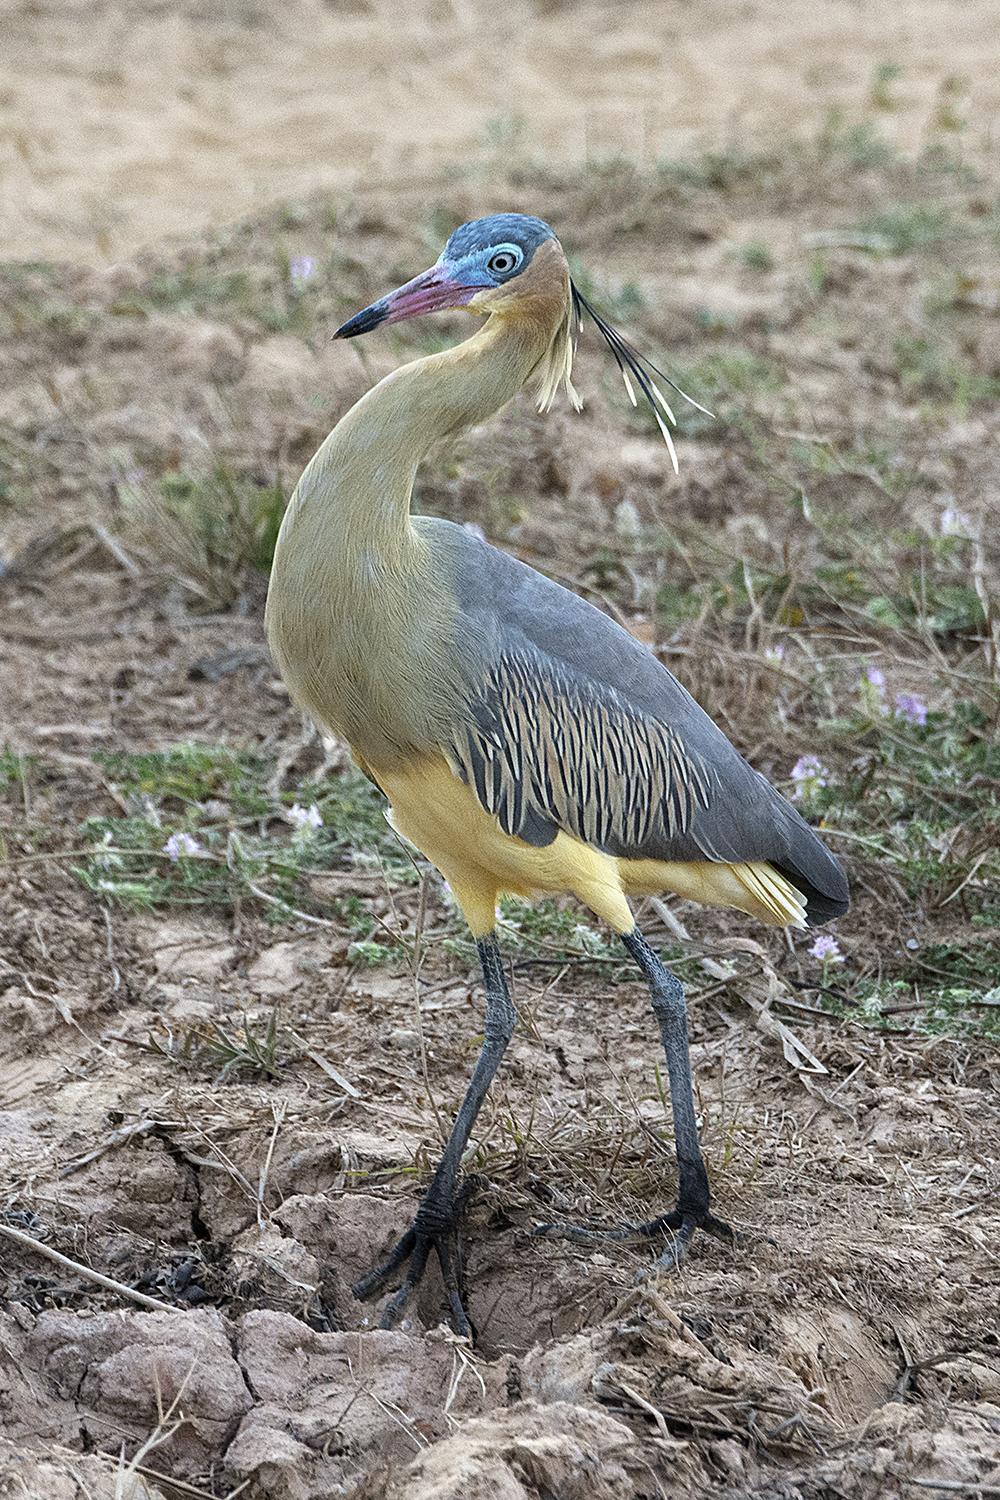 Whistling Heron Photo by Bonnie Flamer